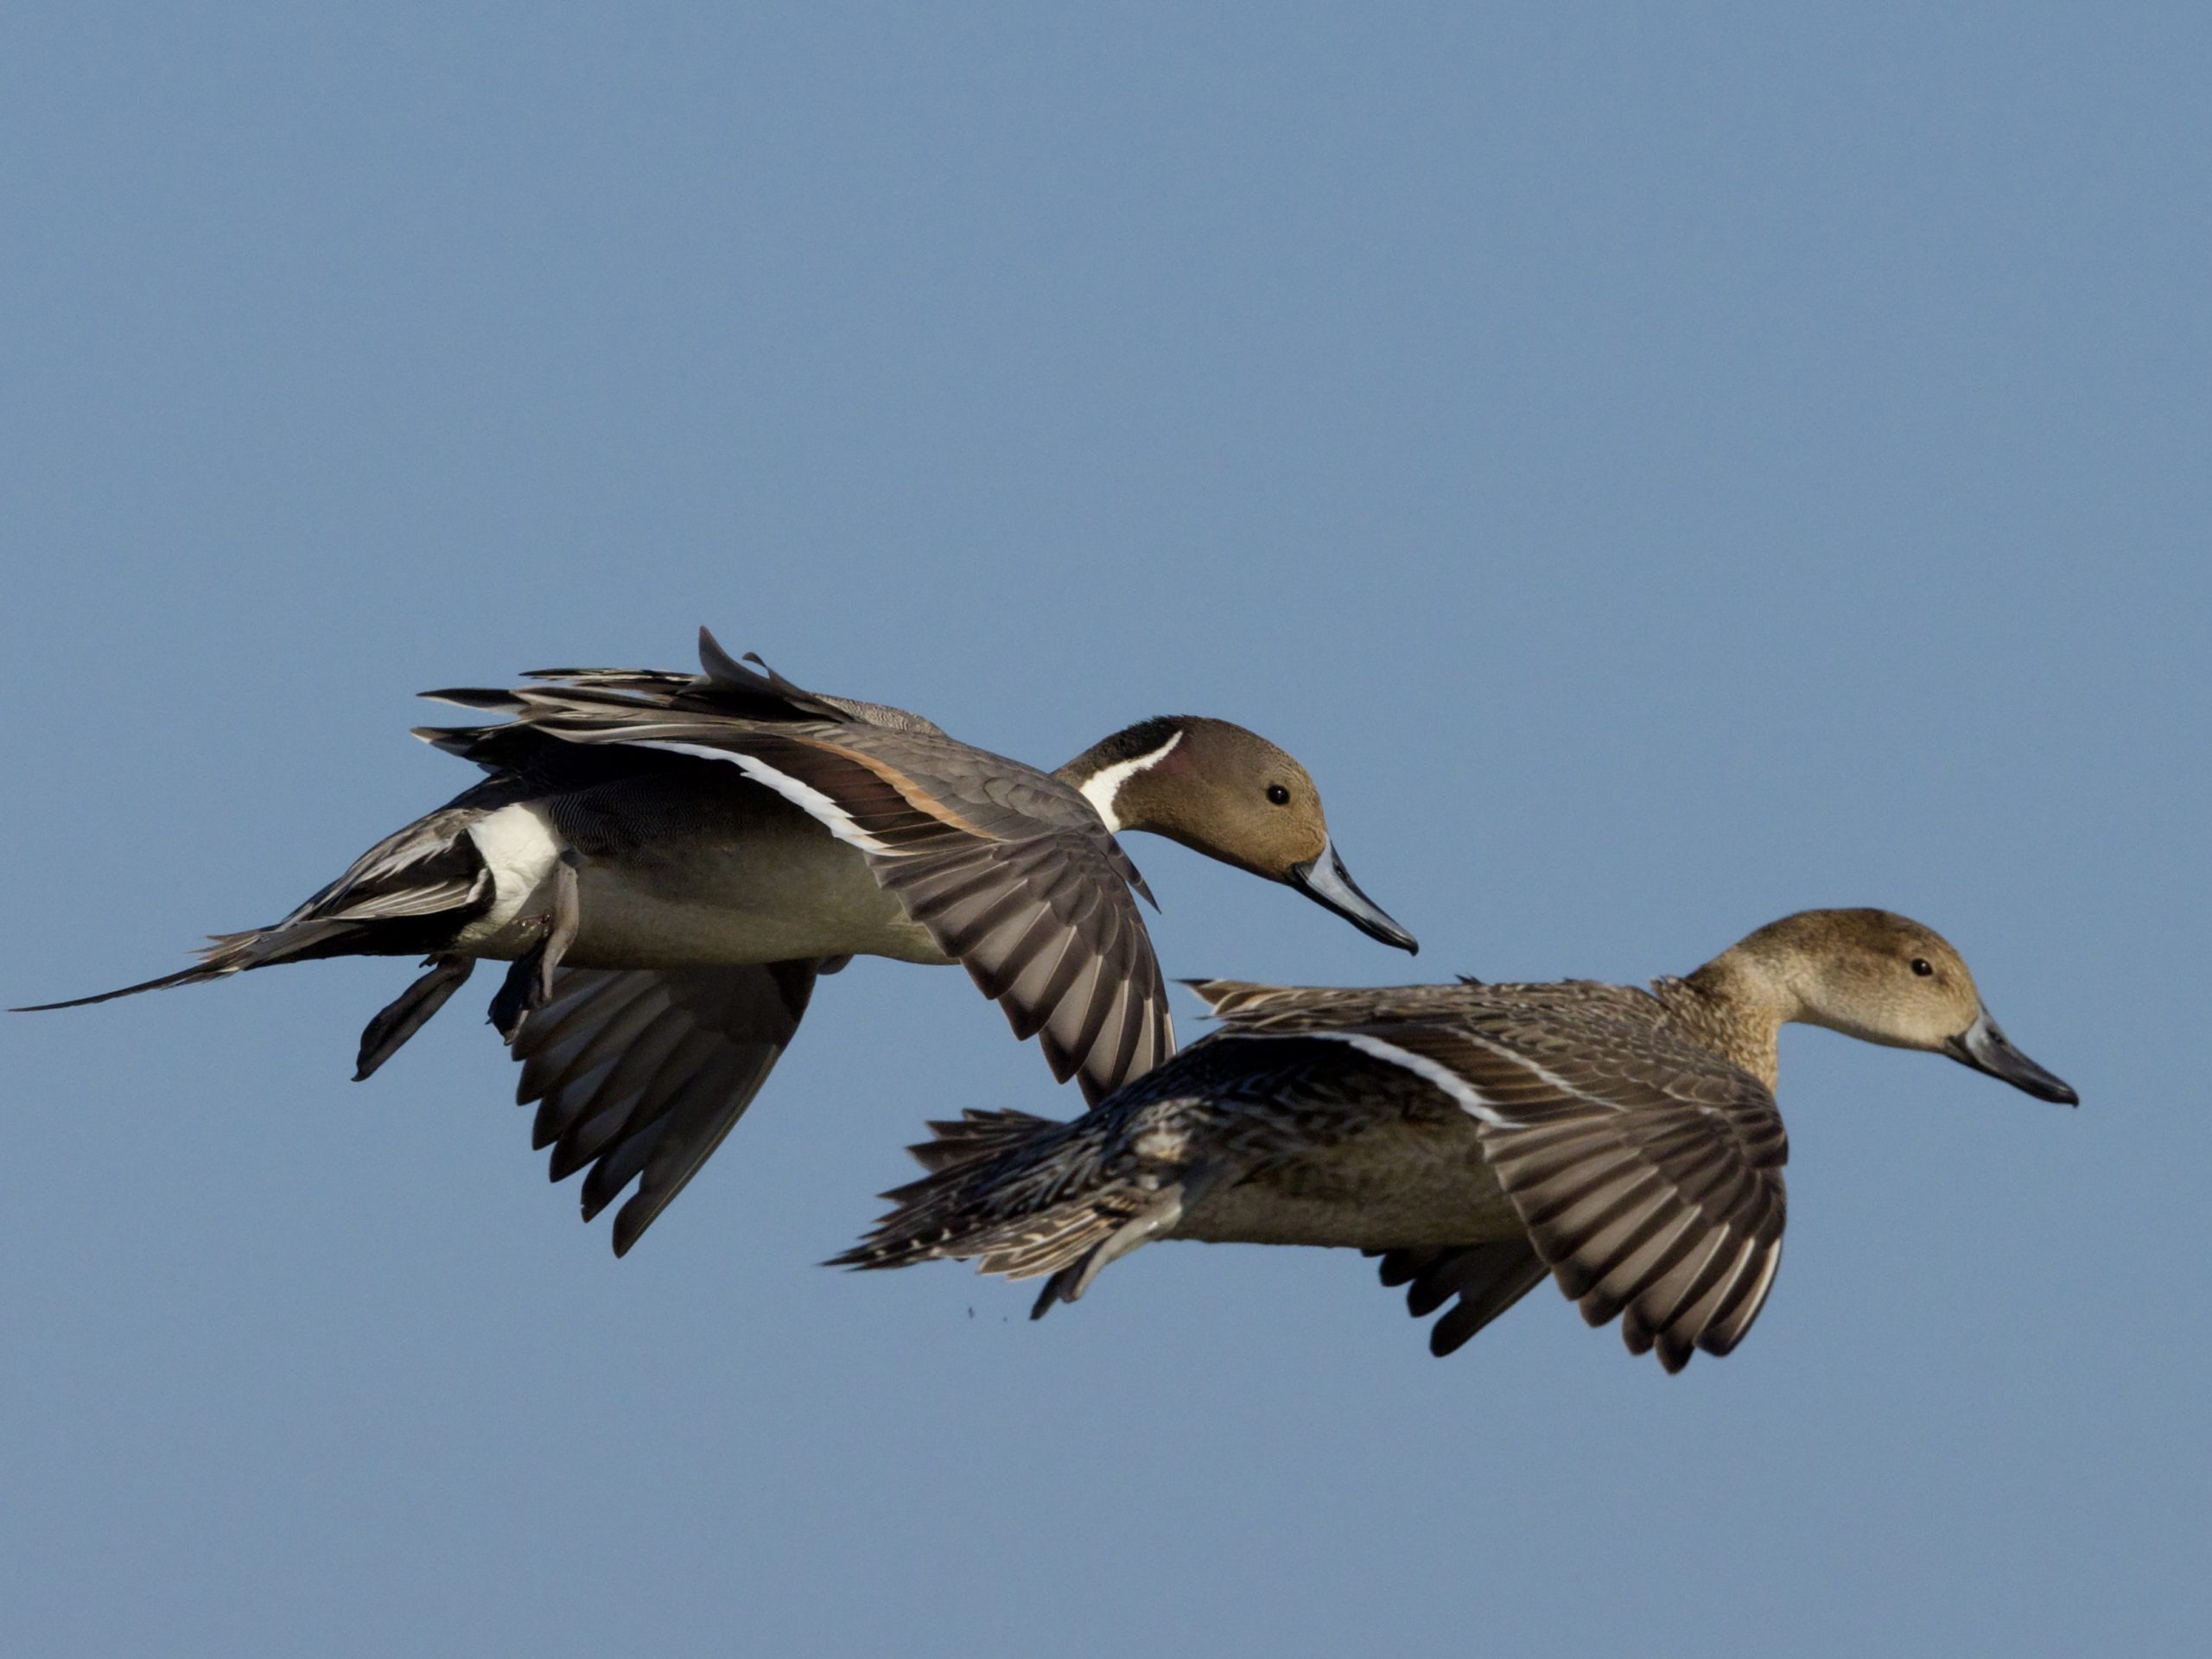 Northern Pintails in flight at Bolsa Chica Wetlands